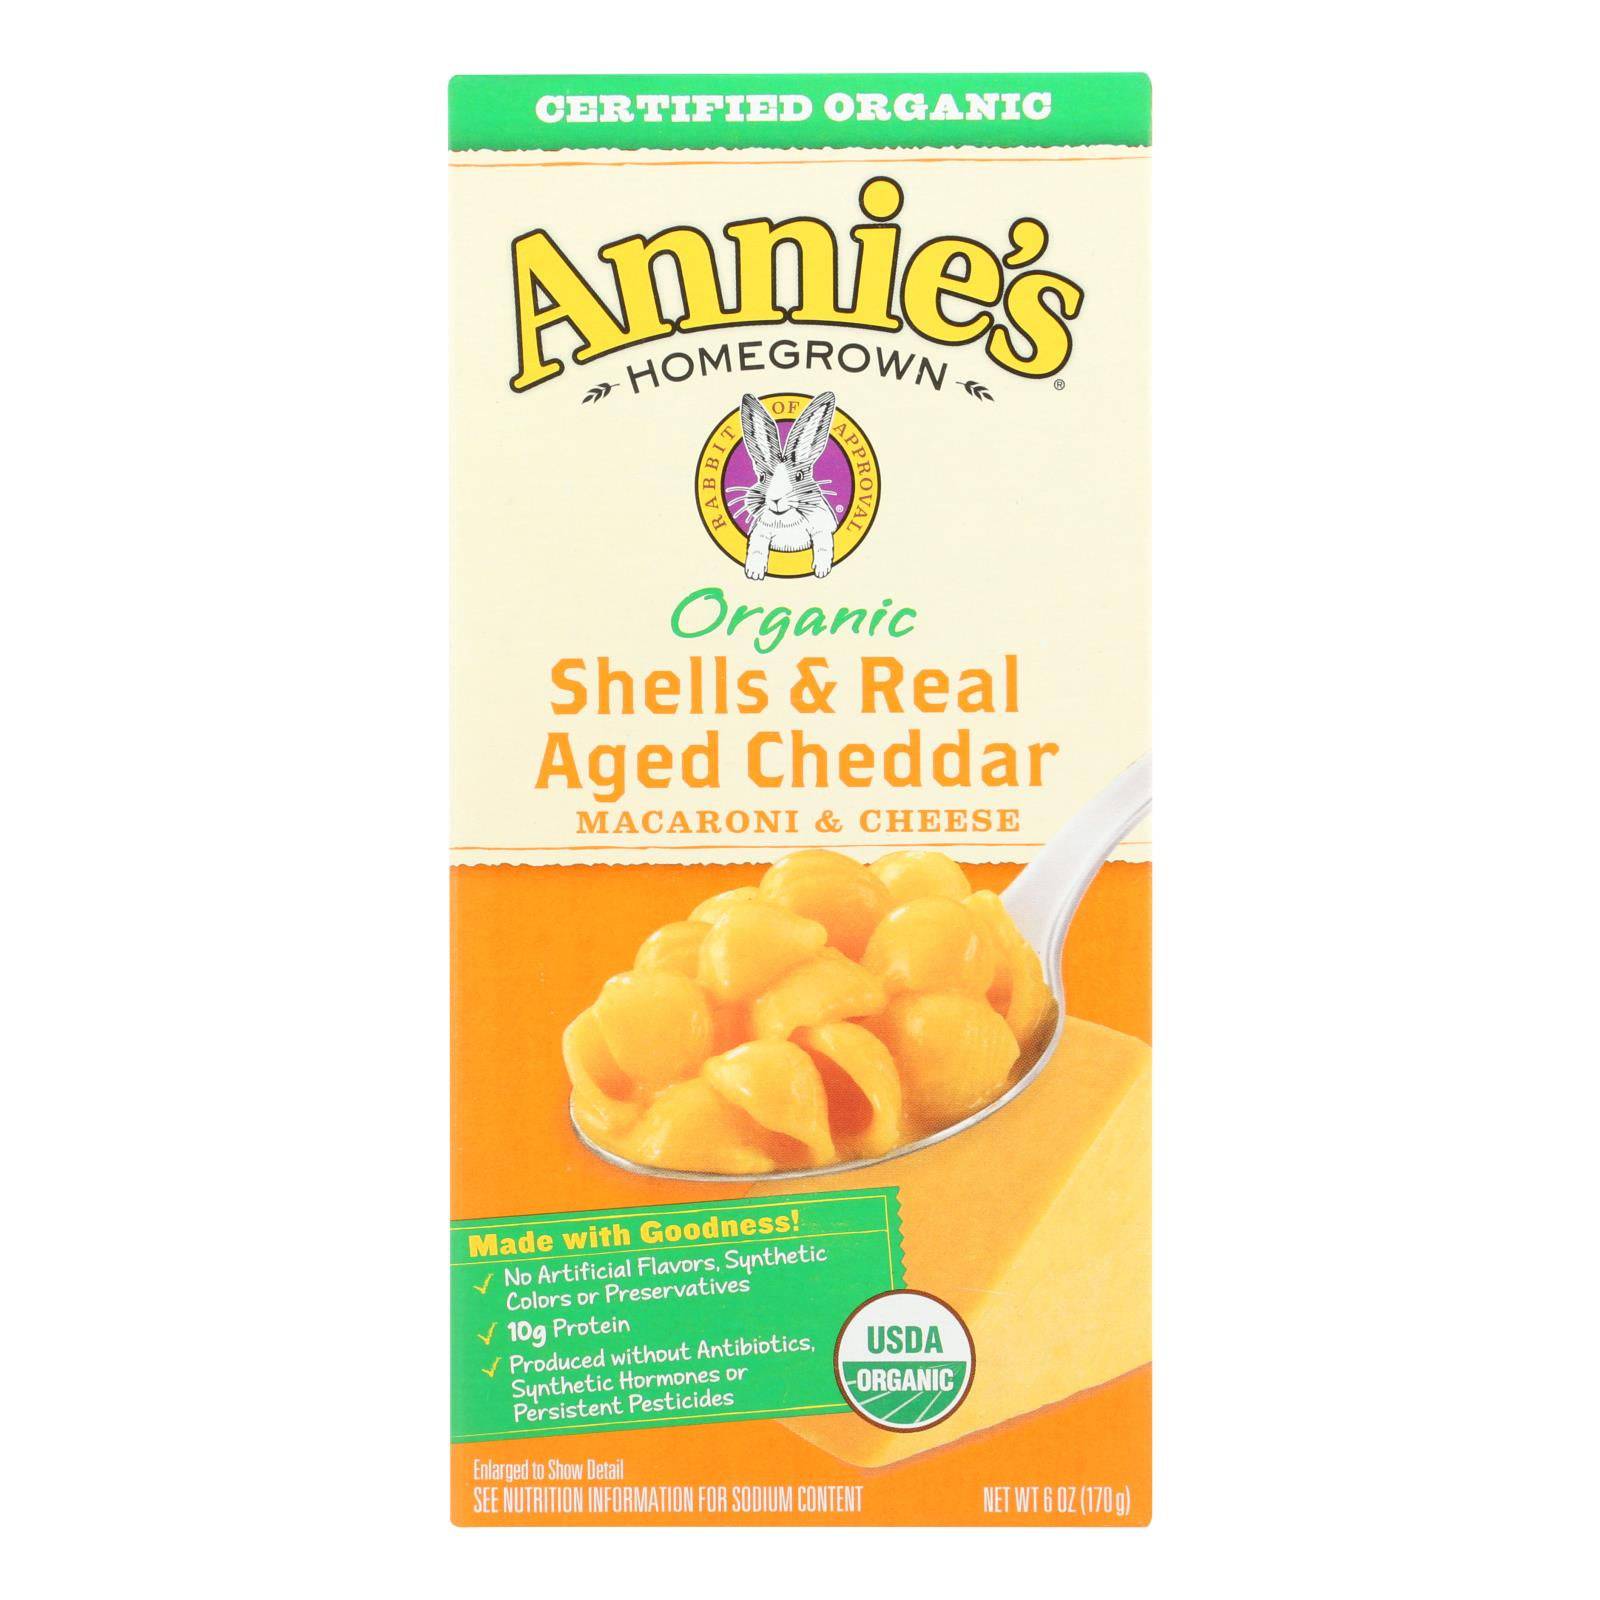 Buy Annie's Homegrown Organic Shells And Real Aged Cheddar Macaroni And Cheese - Case Of 12 - 6 Oz.  at OnlyNaturals.us